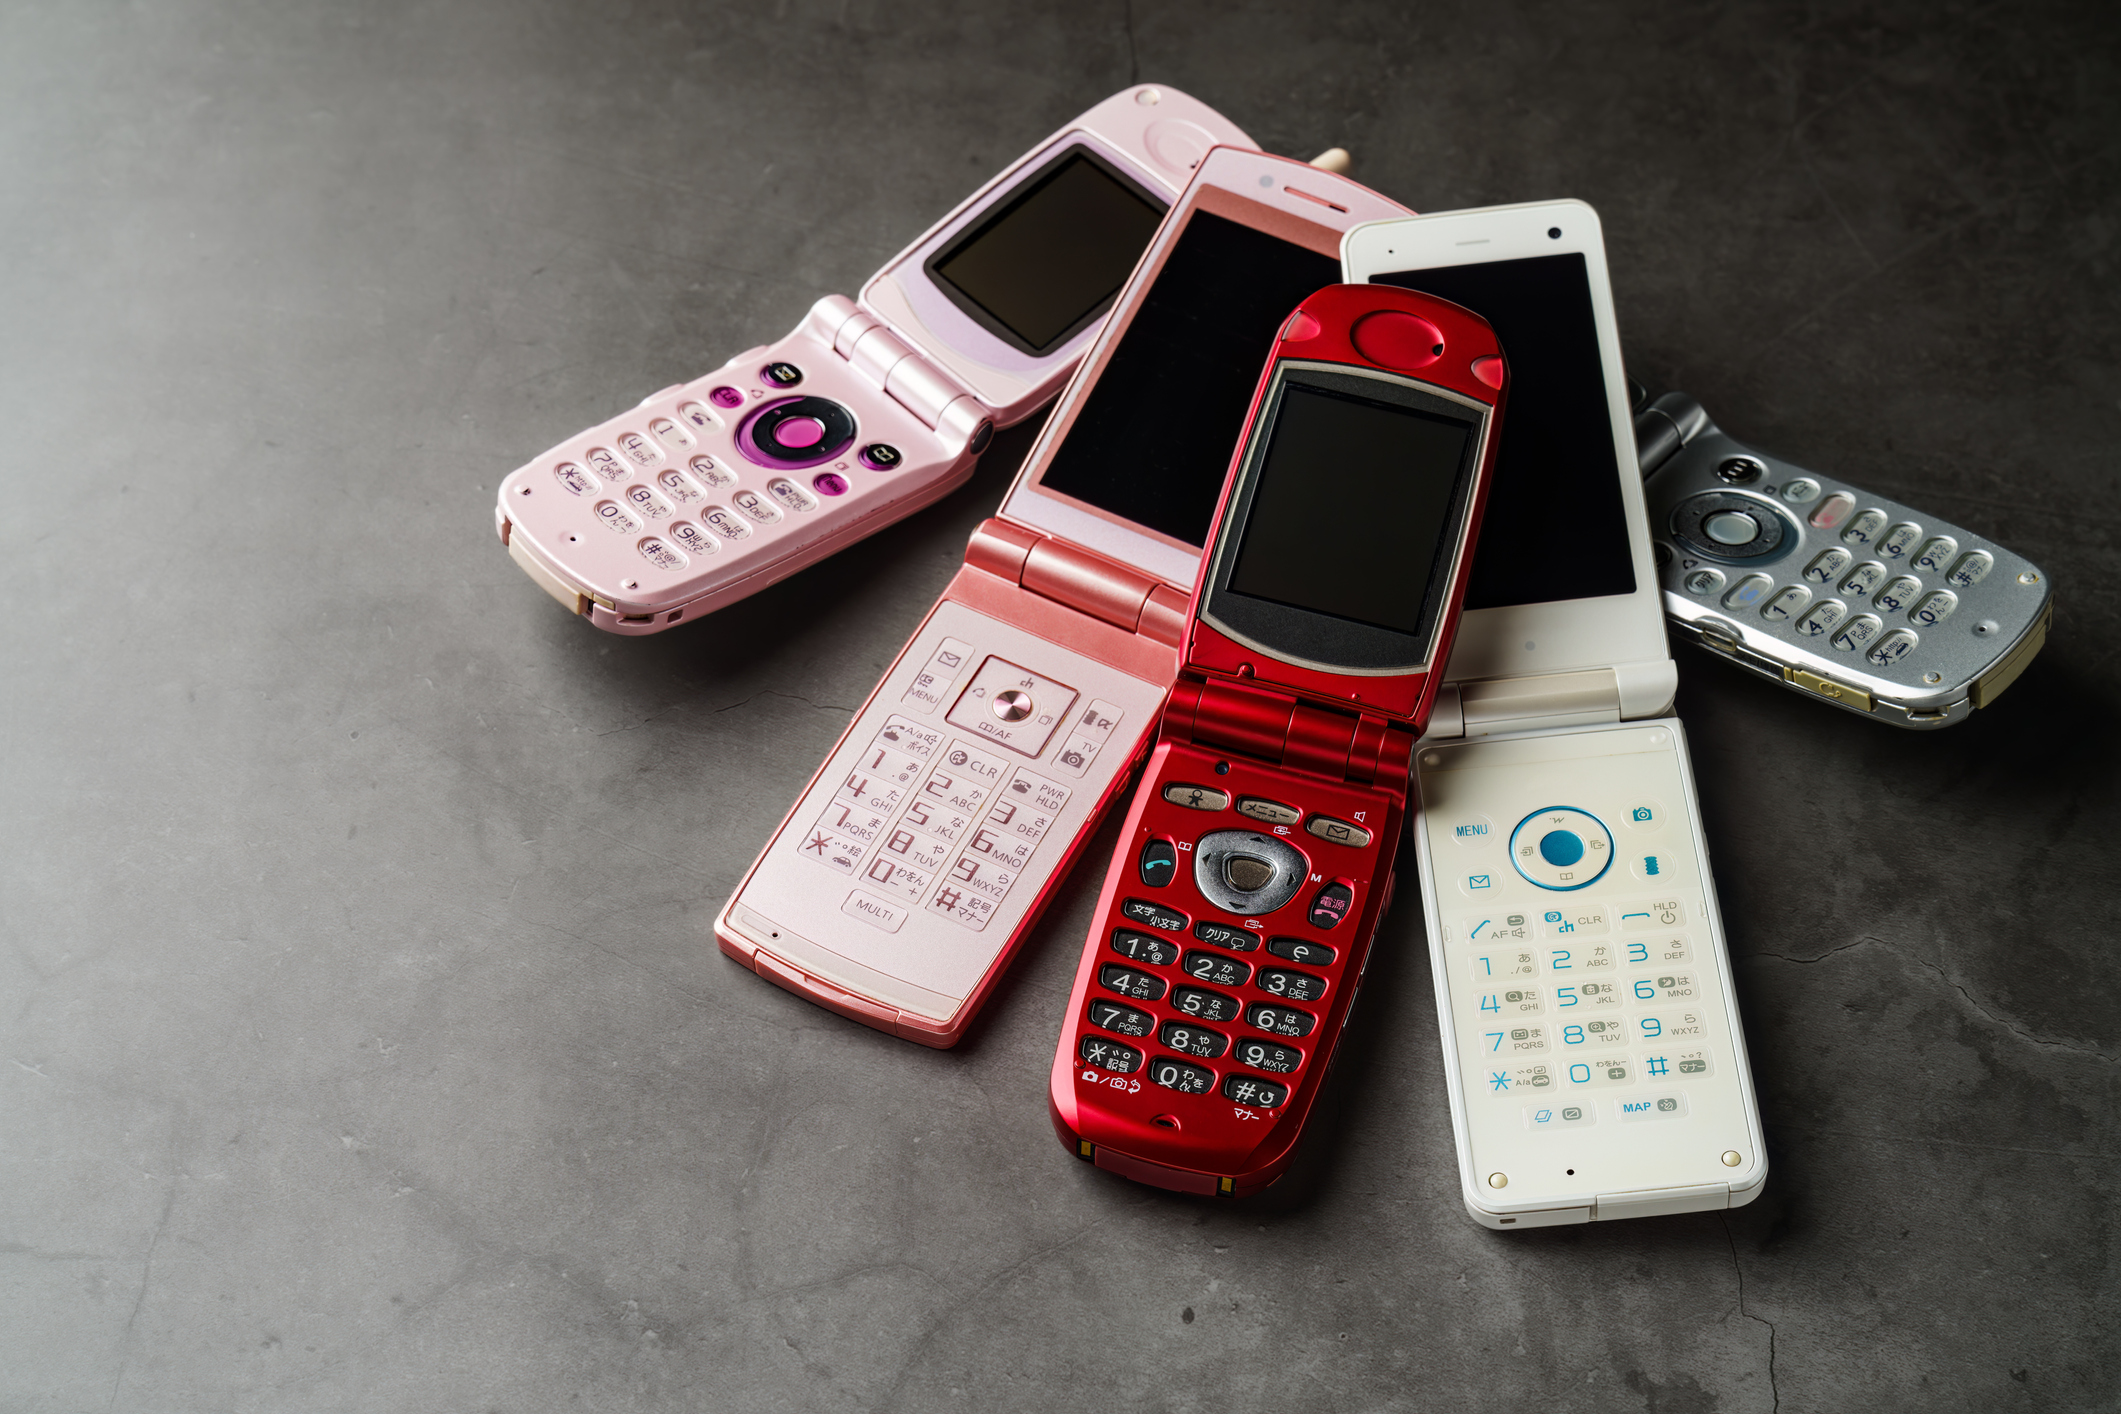 Dumb phones are on the rise in the U.S. as Gen Z limits screen time